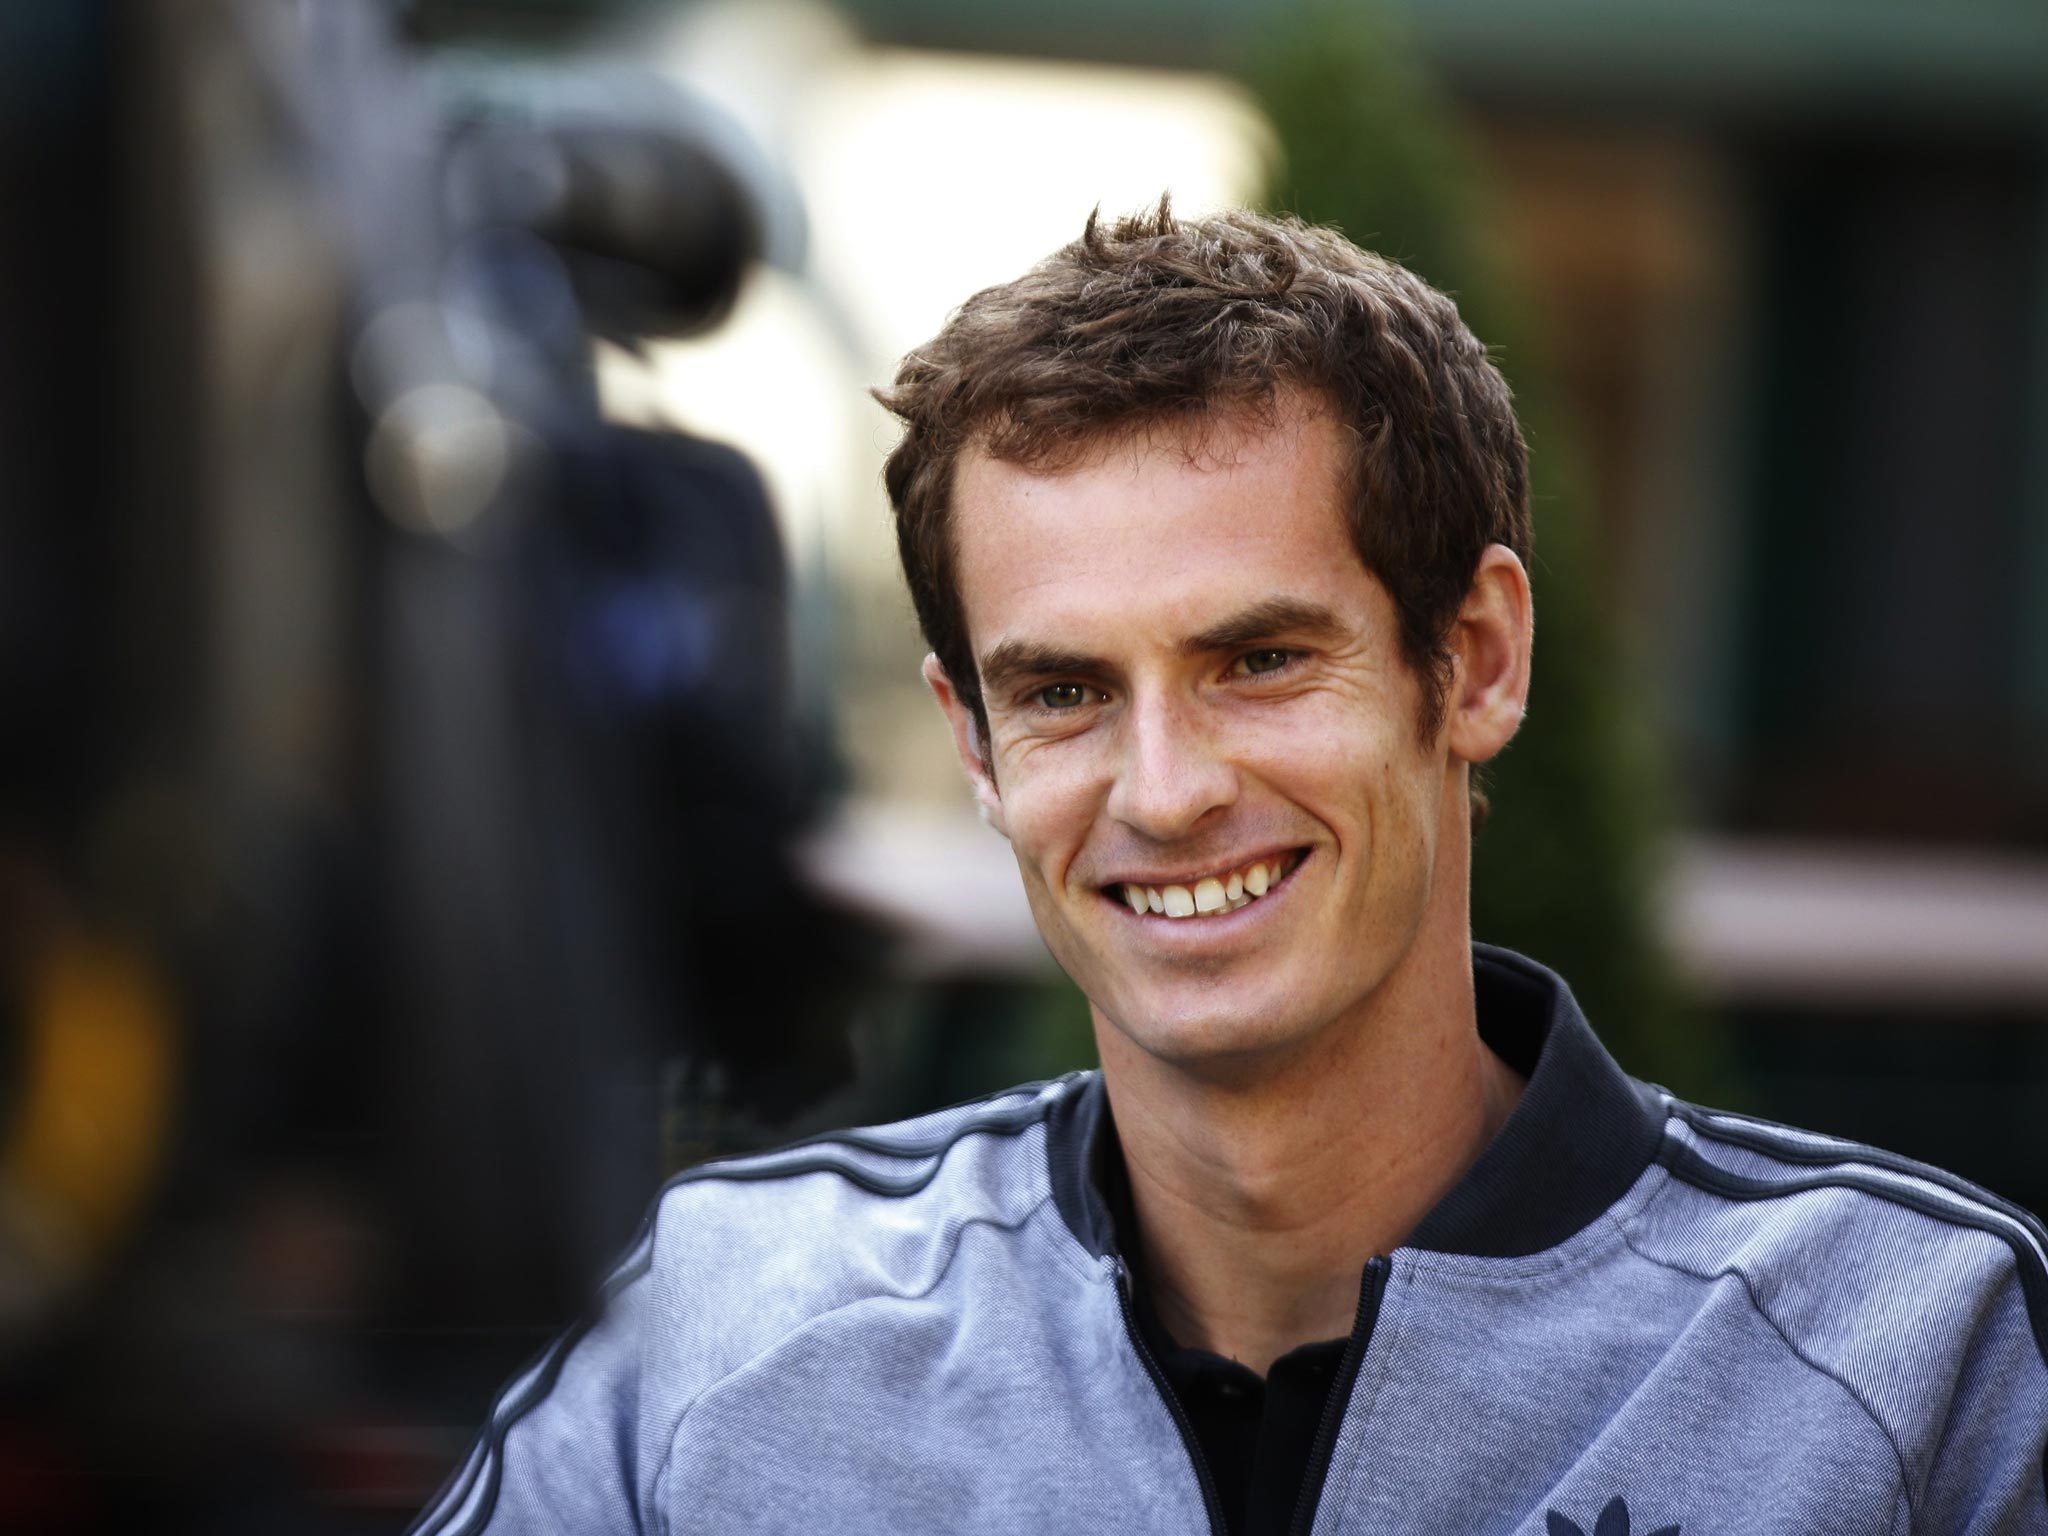 8 July 2013: Tennis player Andy Murray of Britain is interviewed for a breakfast television program the morning after he winning the men's singles title at the Wimbledon Tennis Championships, Wimbledon, southwest London